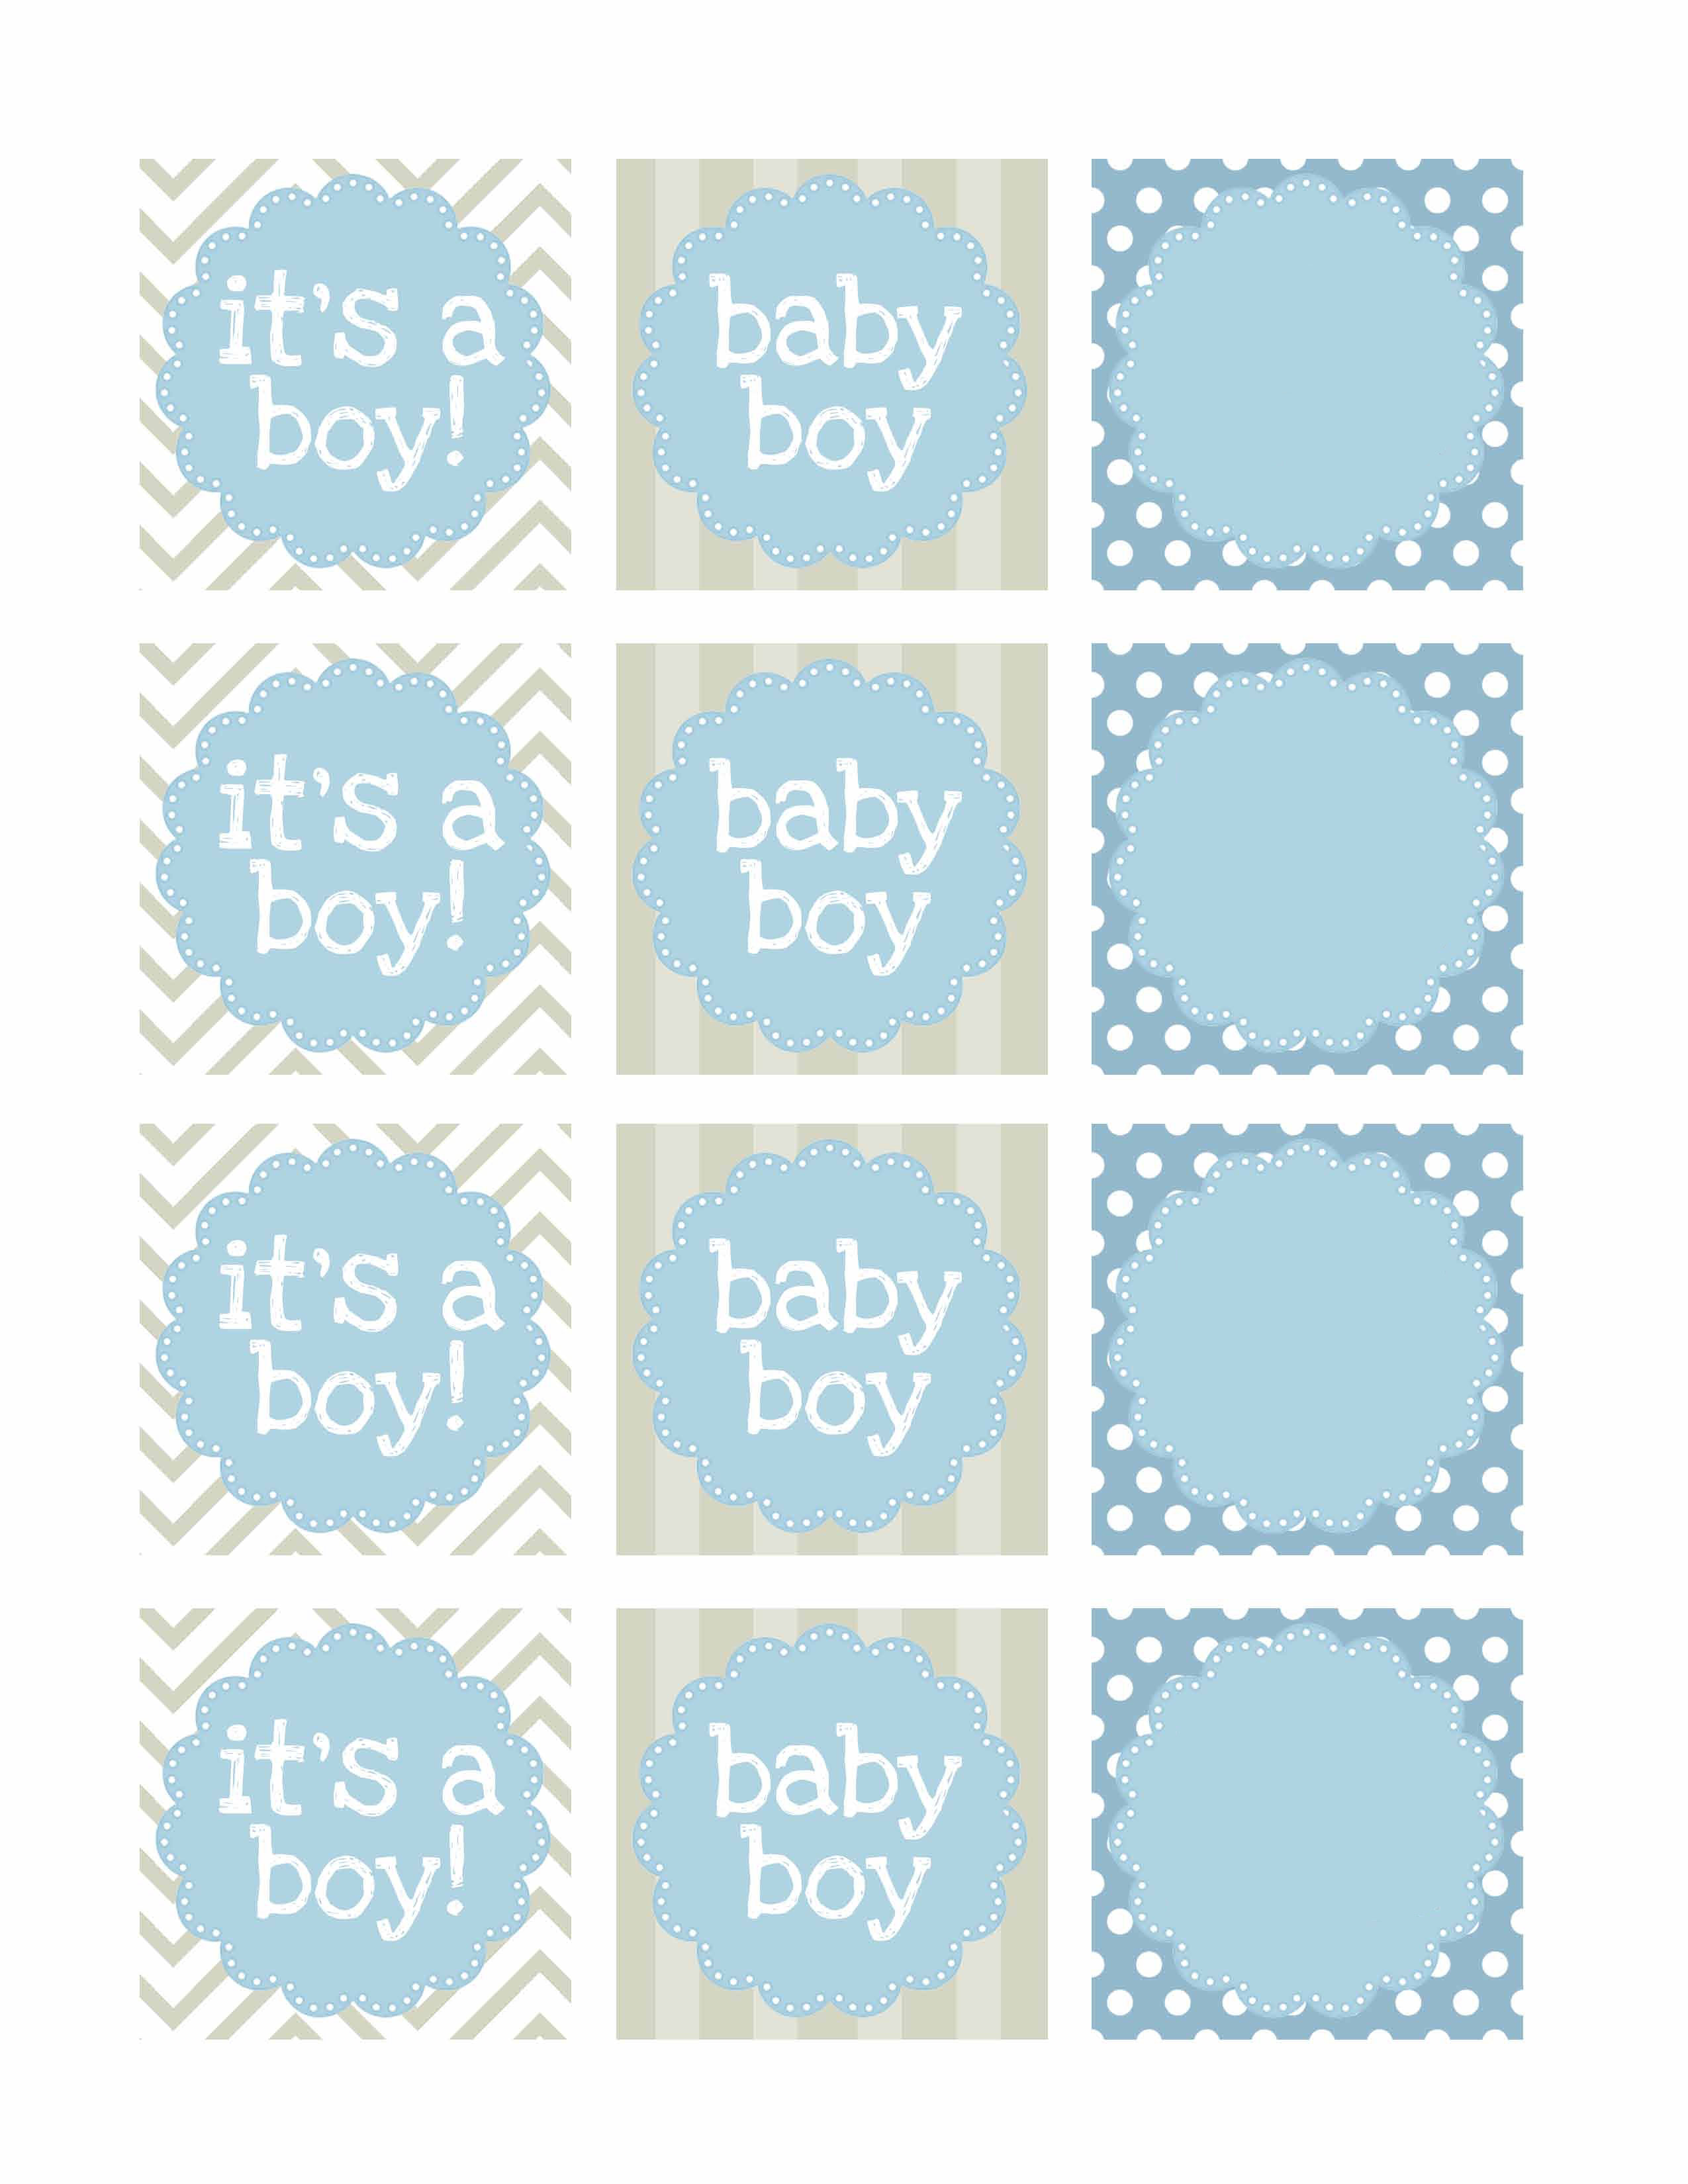 027 Favor Tags Template Ideas Free Baby Shower ~ Ulyssesroom - Free Printable Baby Shower Favor Tags Template